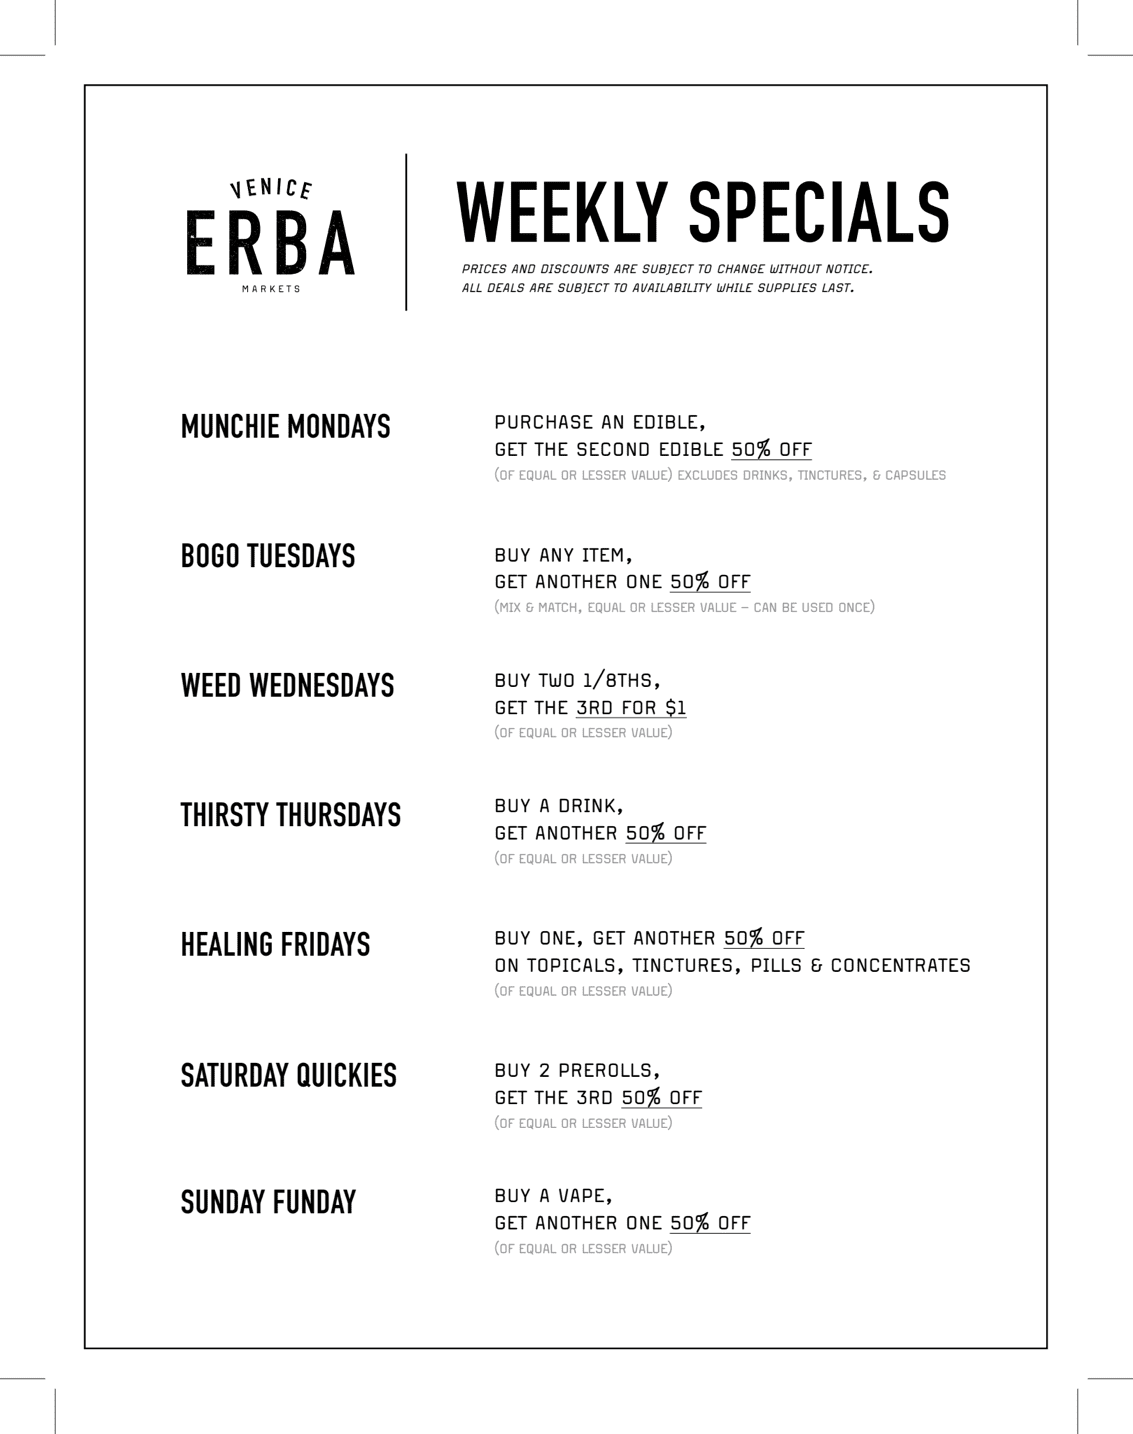 Discounted weekly specials